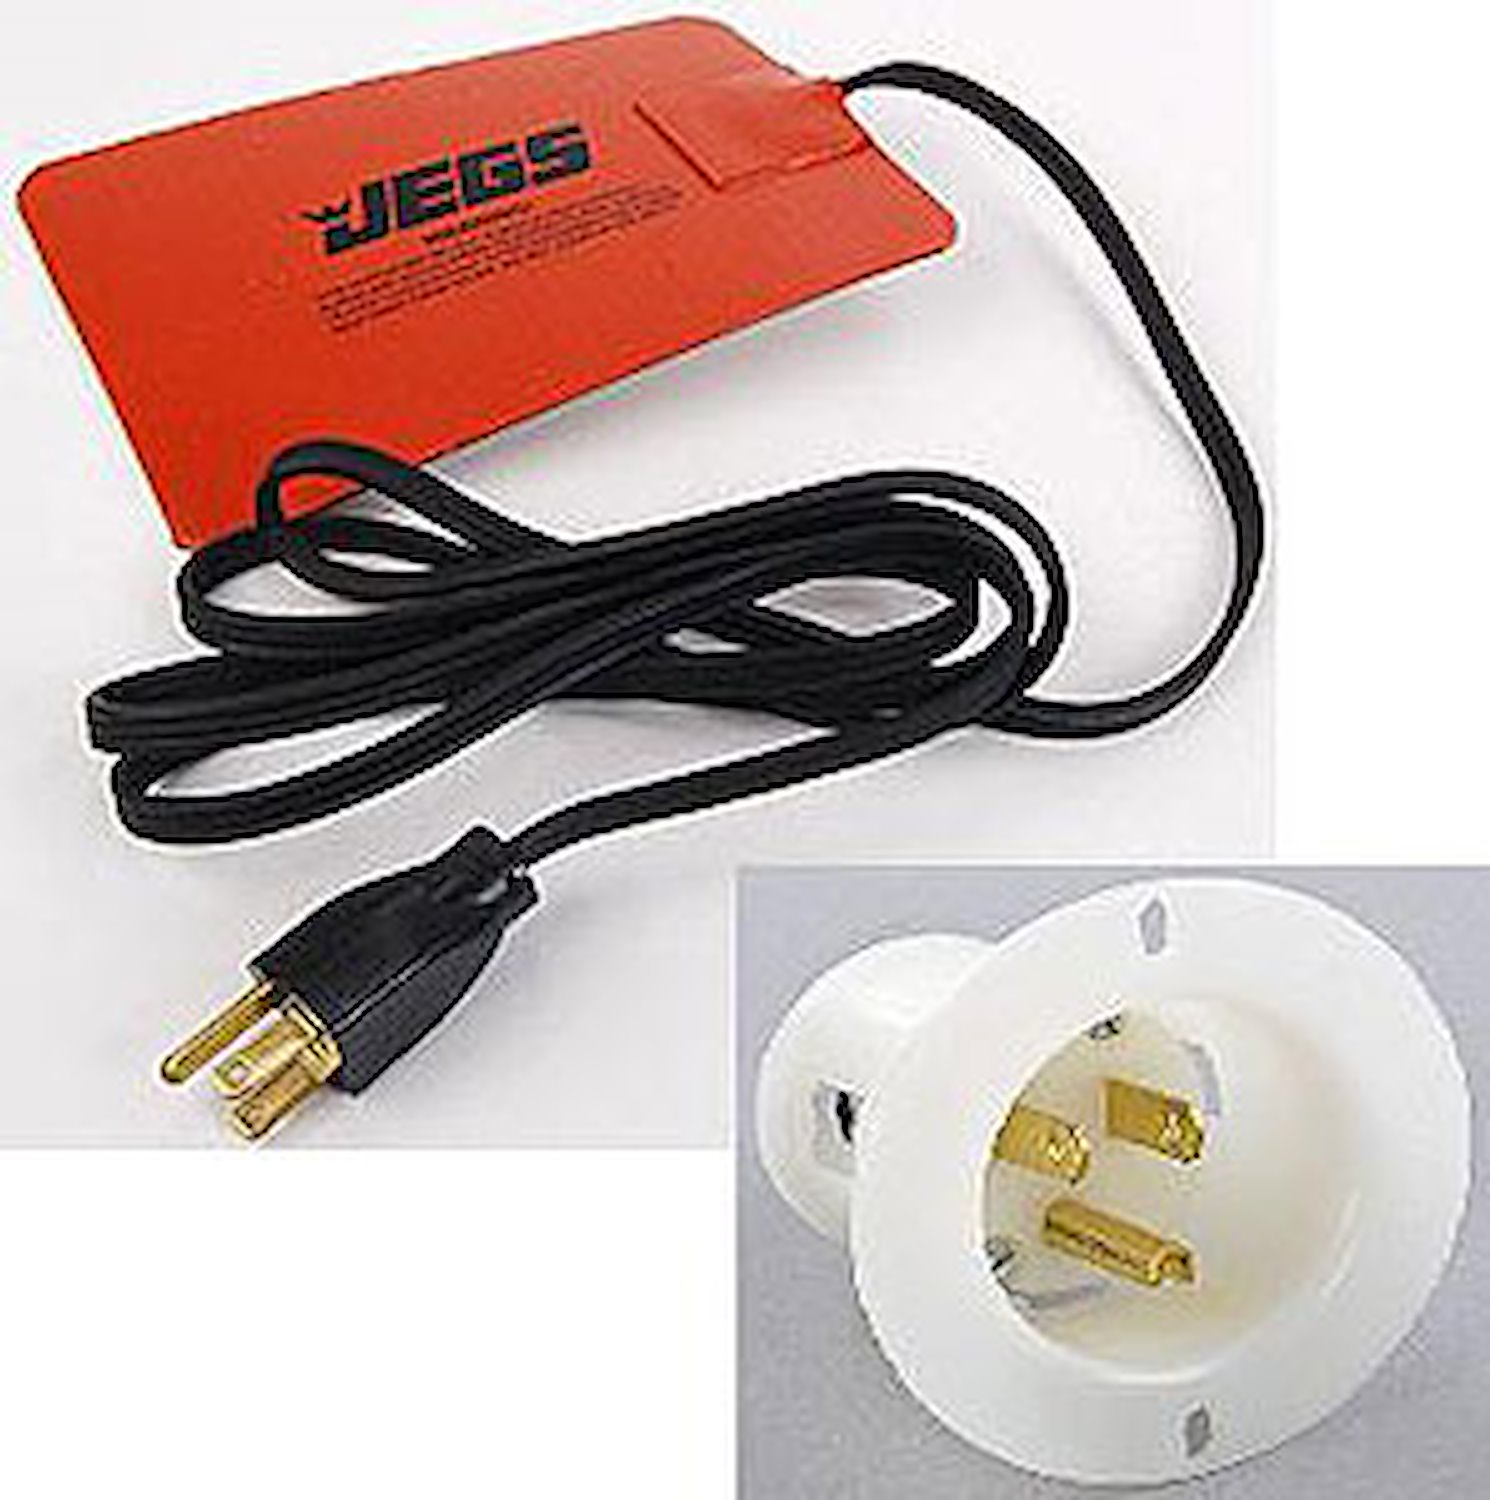 Oil System Heating Pad with 110V Recessed Outlet Includes 555-23671 and 555-81910